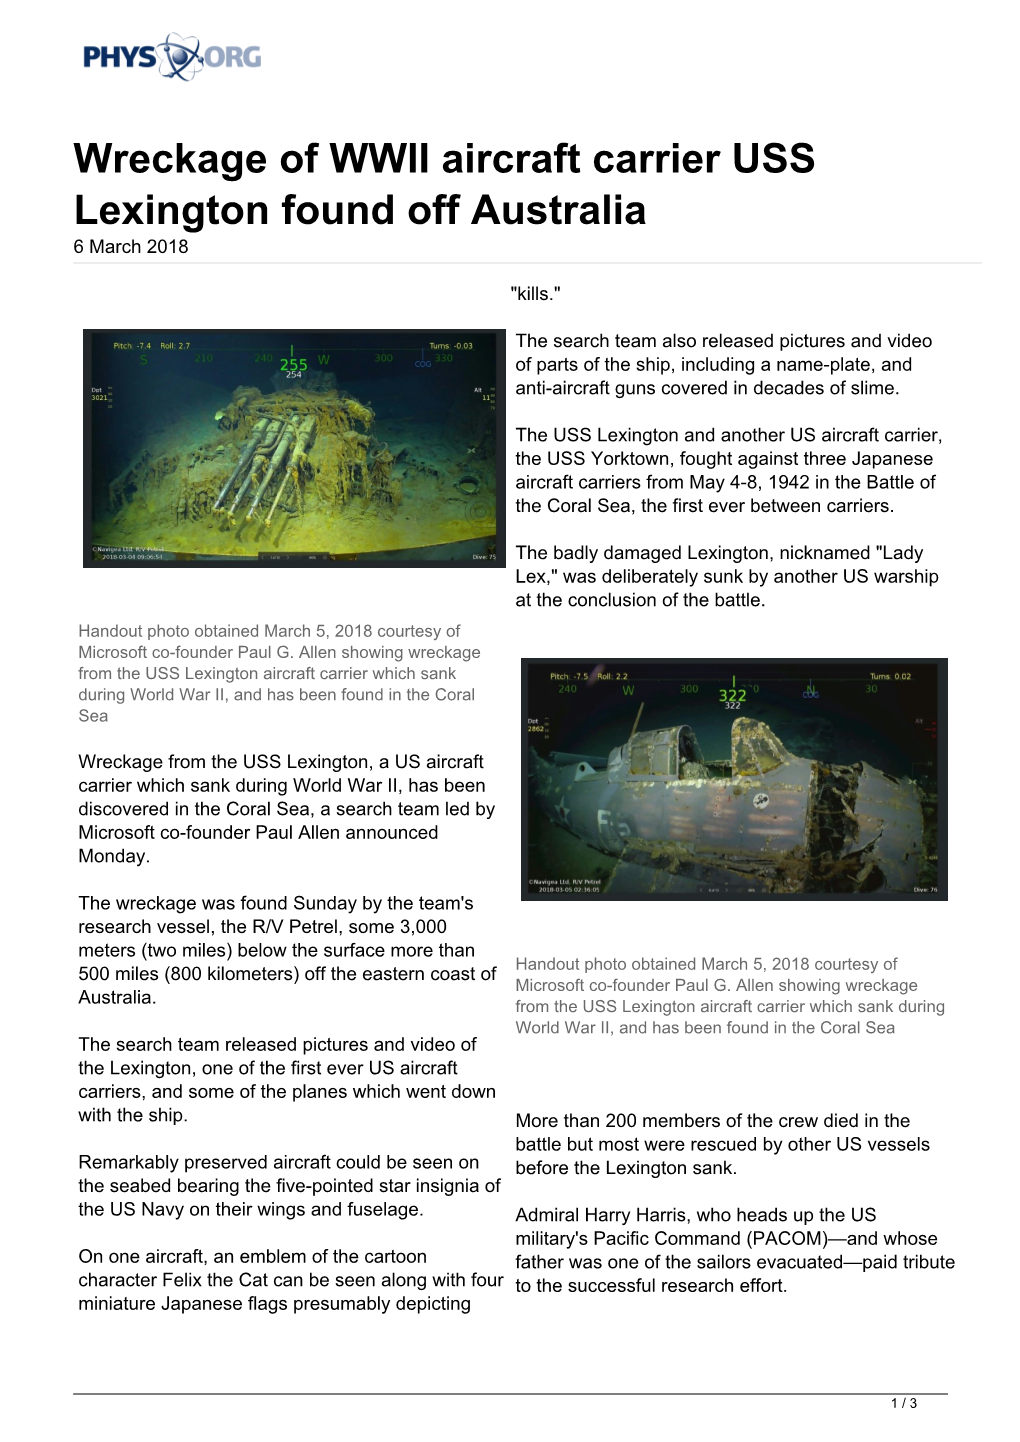 Wreckage of WWII Aircraft Carrier USS Lexington Found Off Australia 6 March 2018